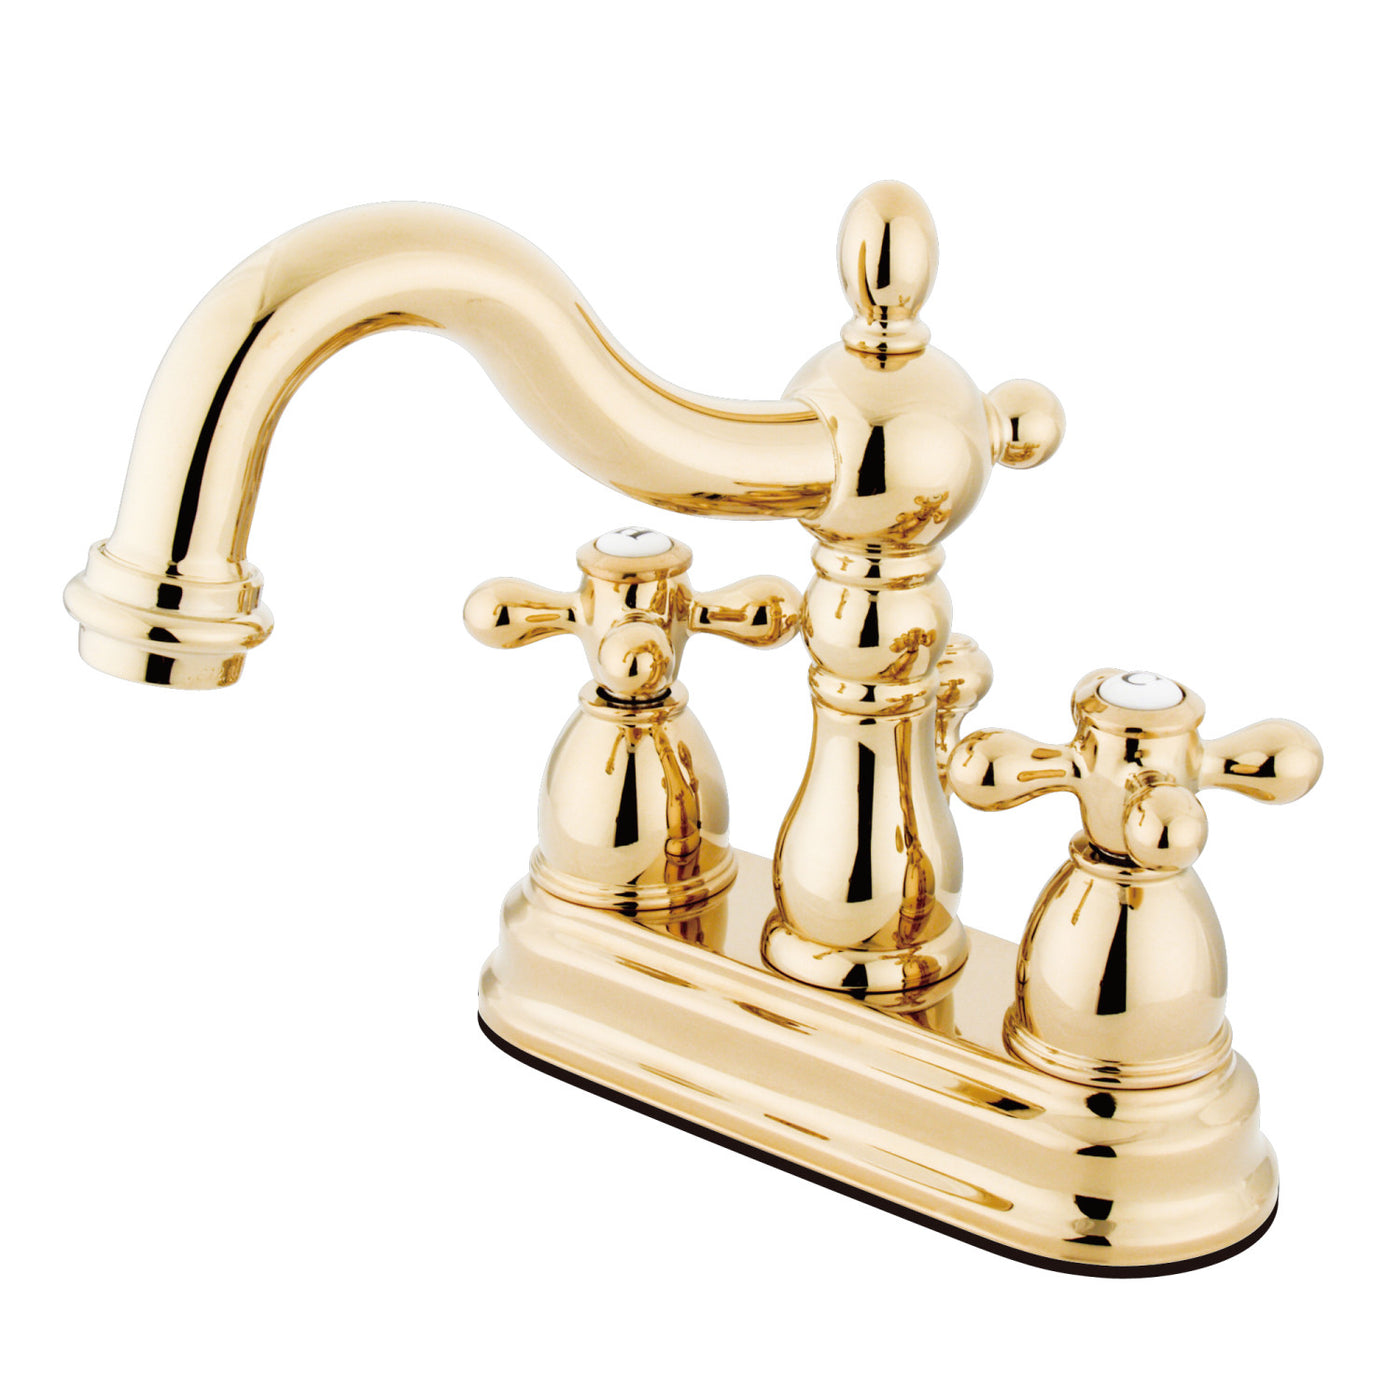 Elements of Design EB1602AX 4-Inch Centerset Bathroom Faucet with Plastic Pop-Up, Polished Brass